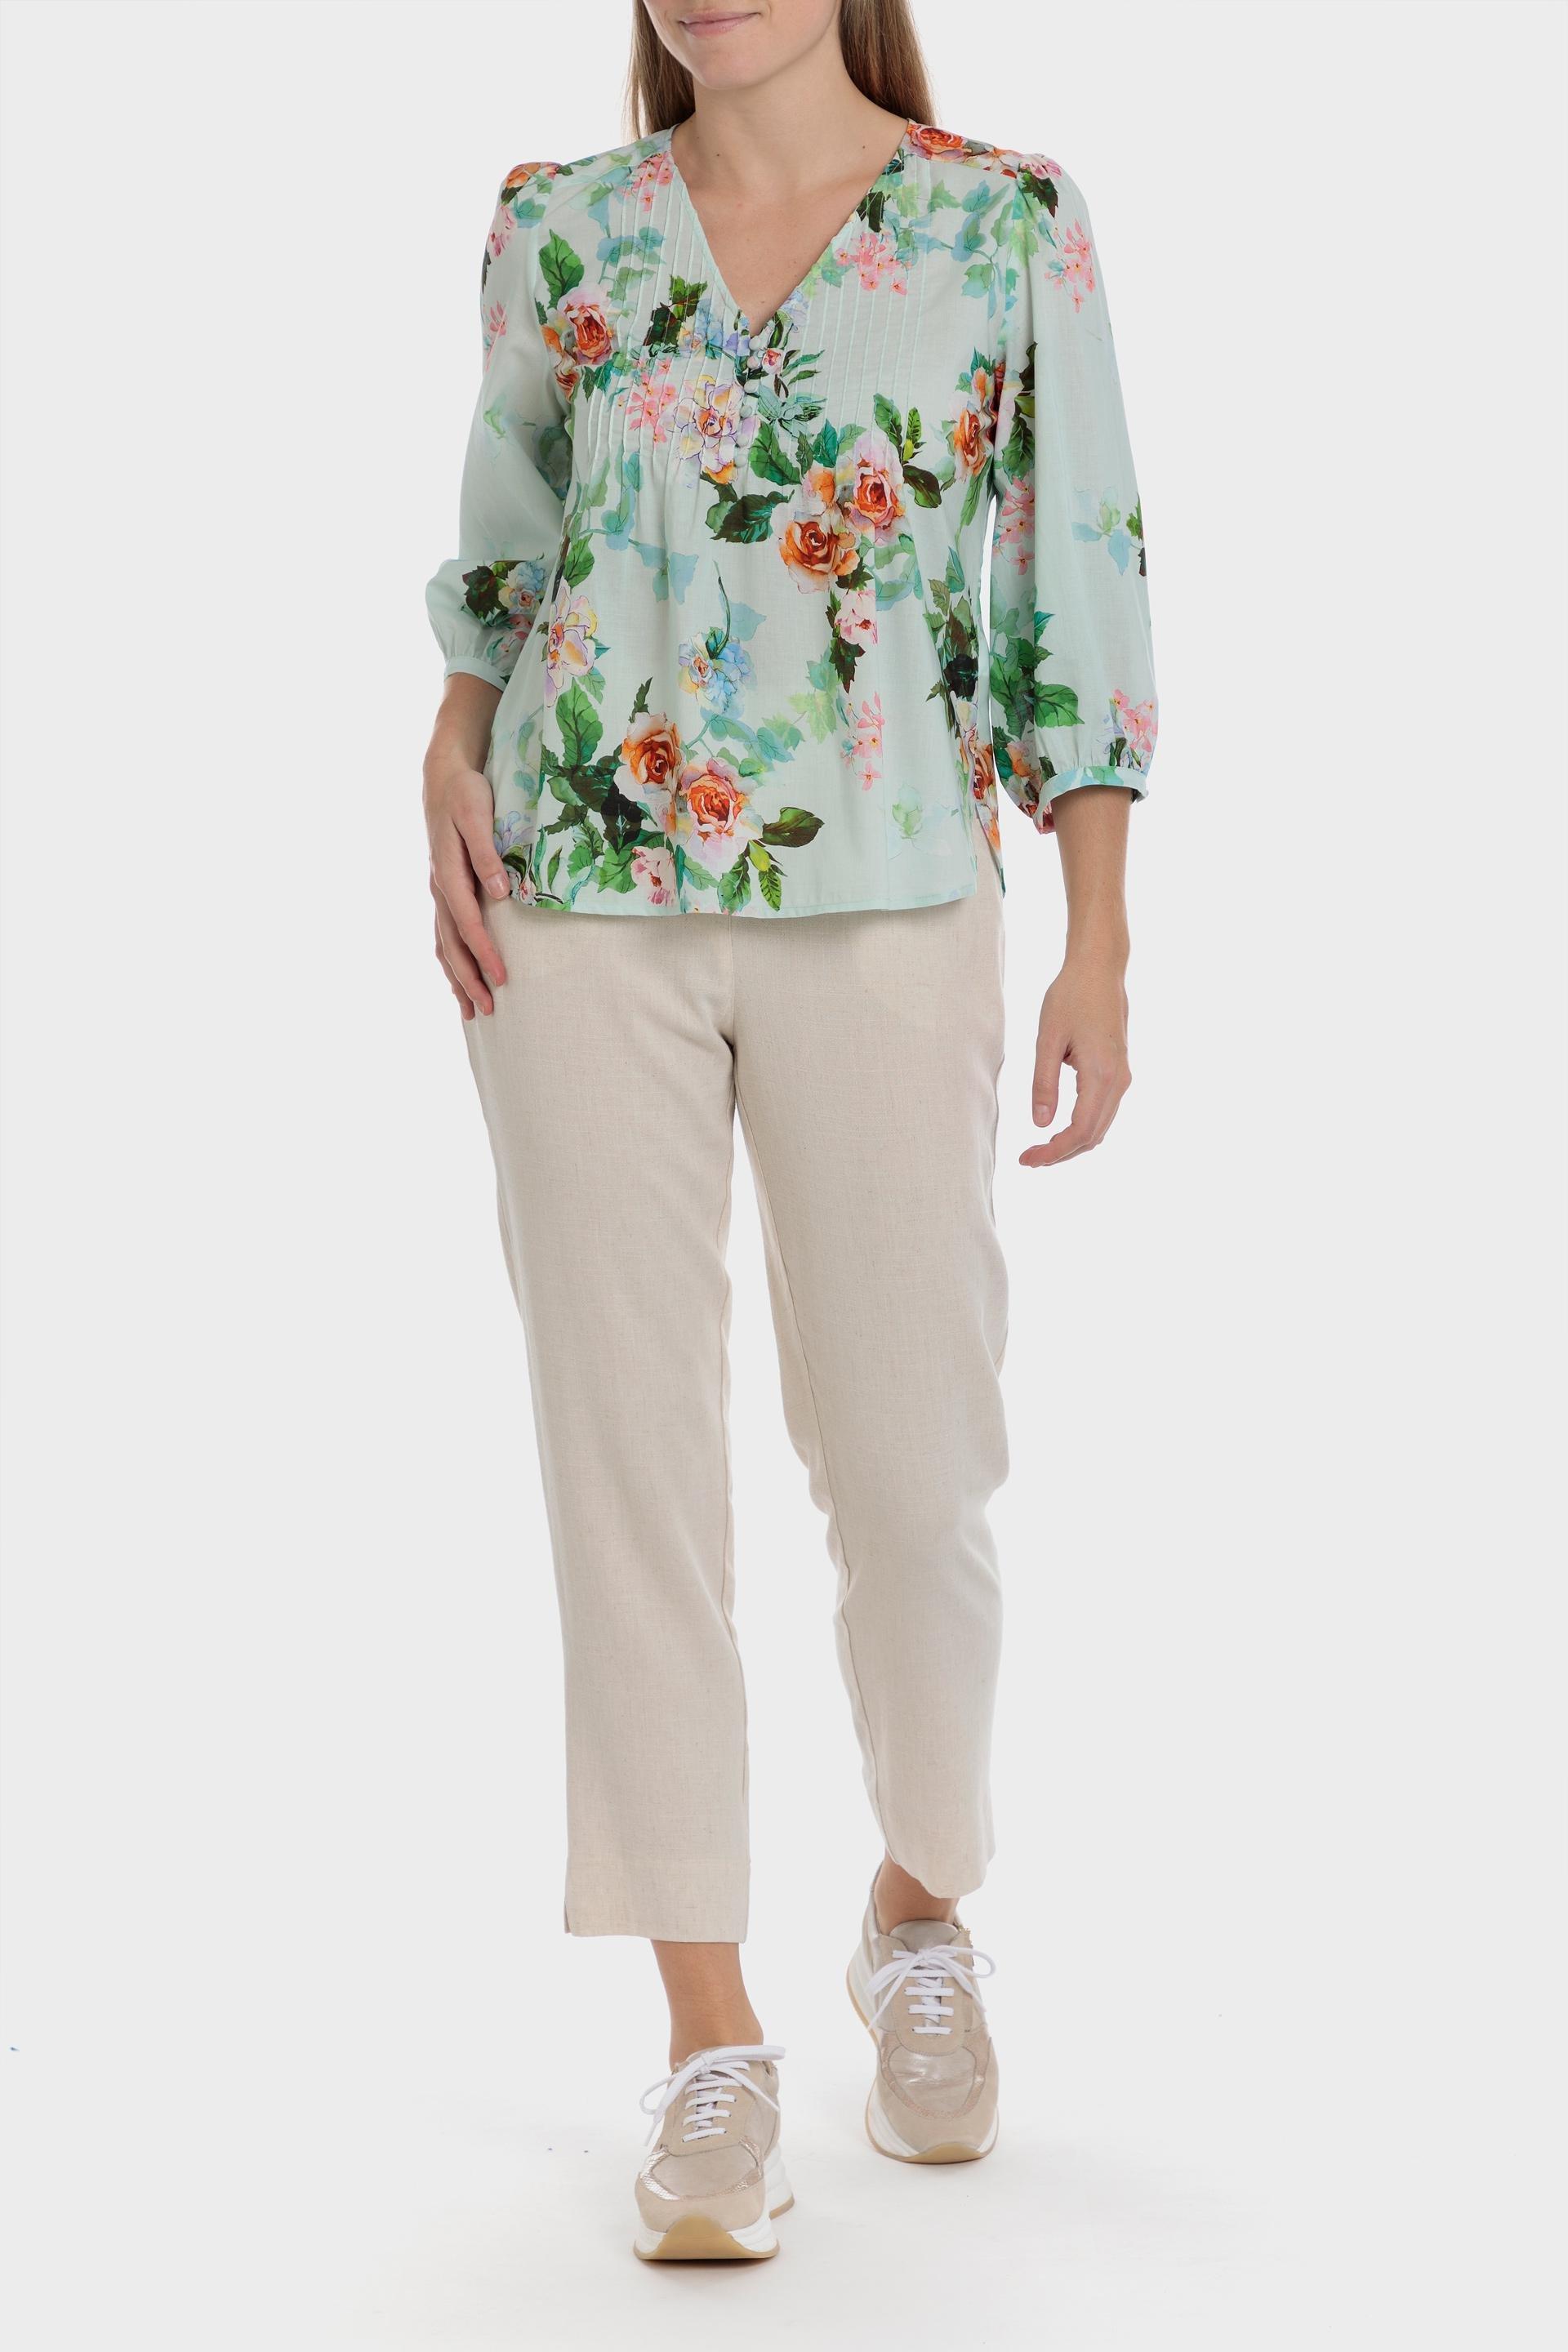 Punt Roma - Green Floral Print Blouse